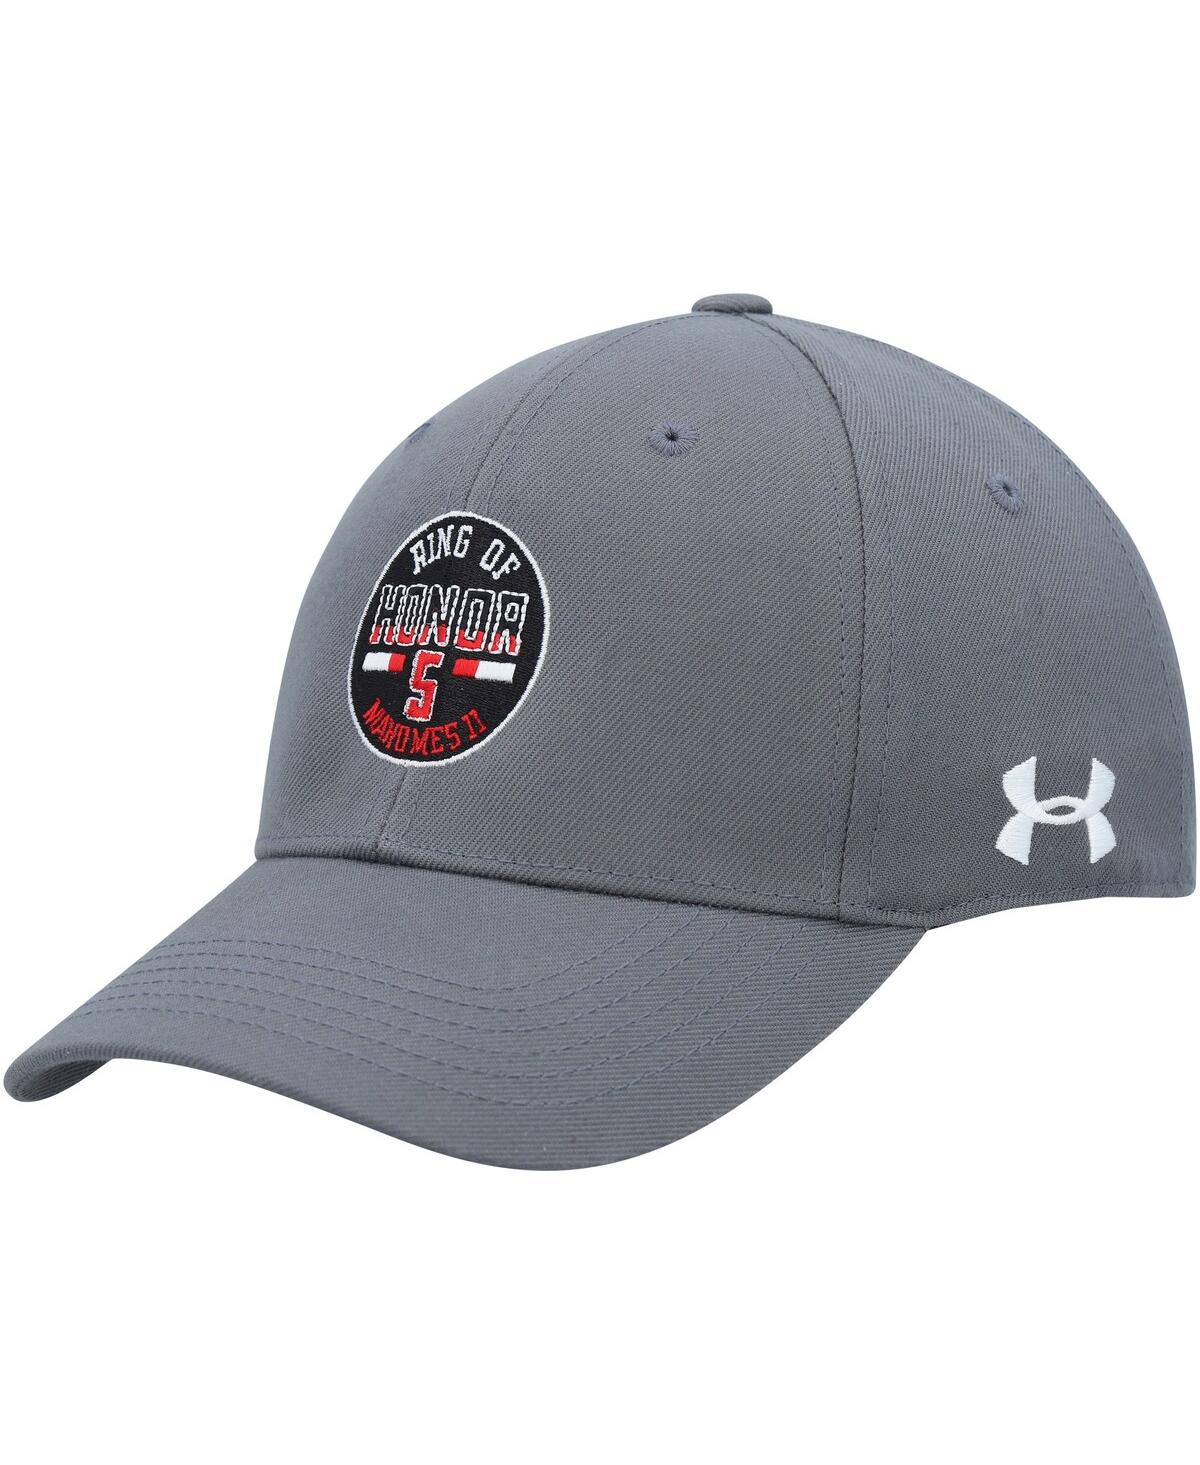 Shop Under Armour Men's  Patrick Mahomes Gray Texas Tech Red Raiders Ring Of Honor Adjustable Hat